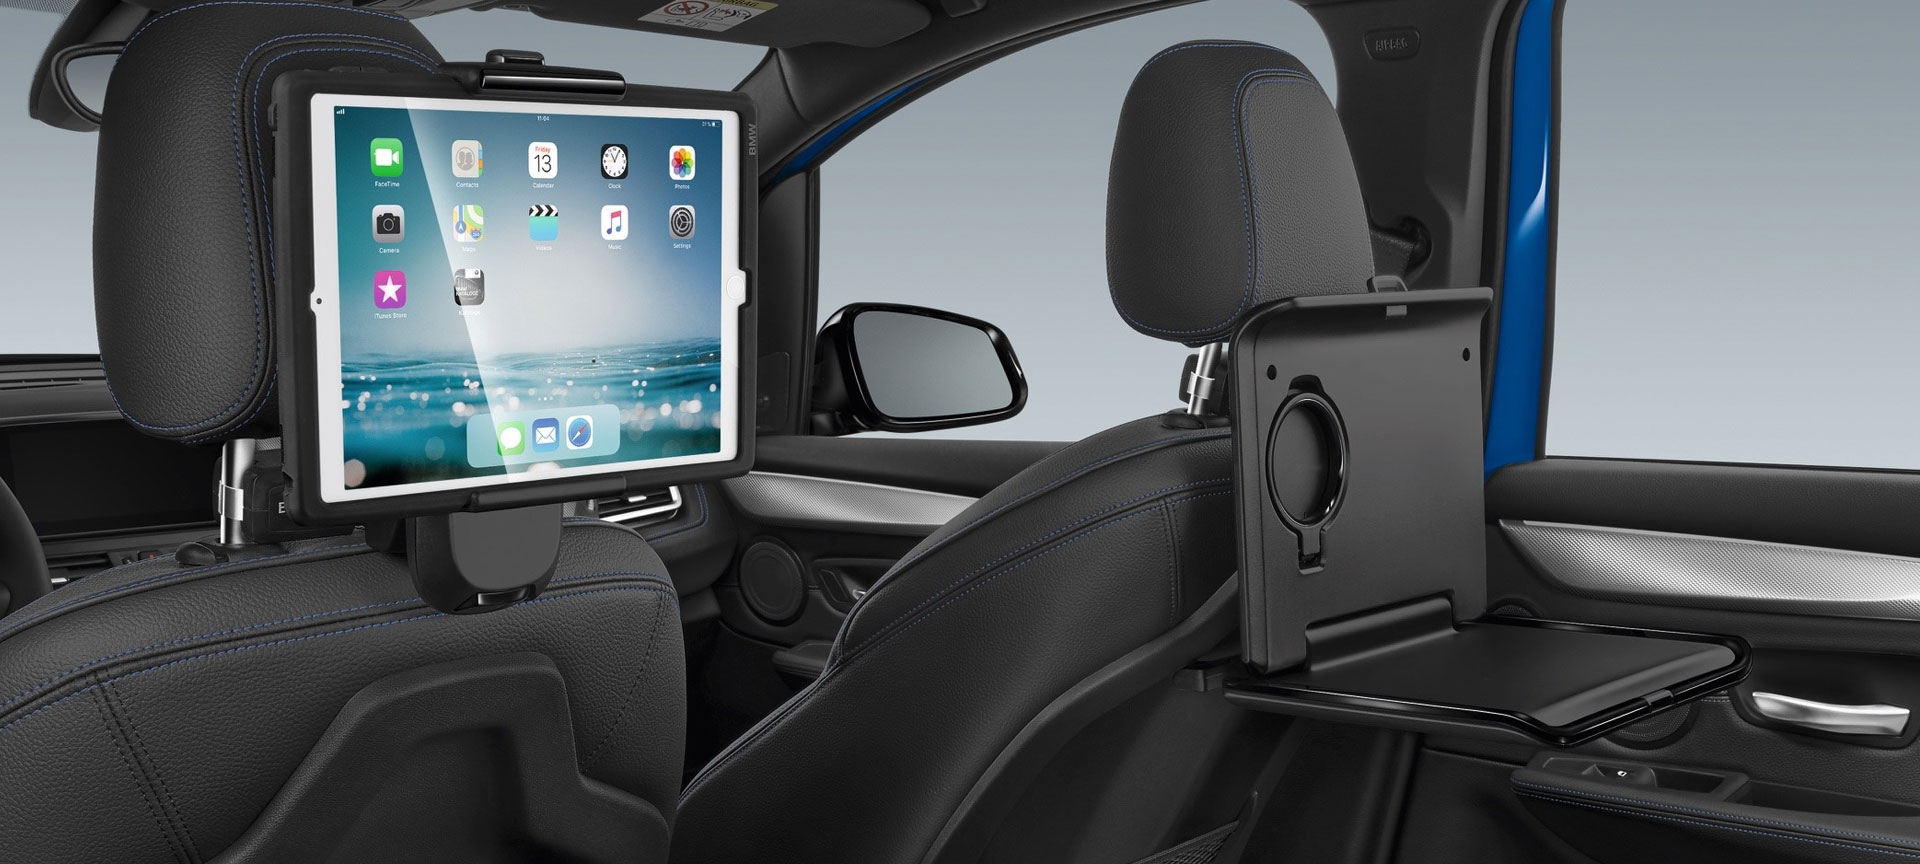 bmw travel and comfort system